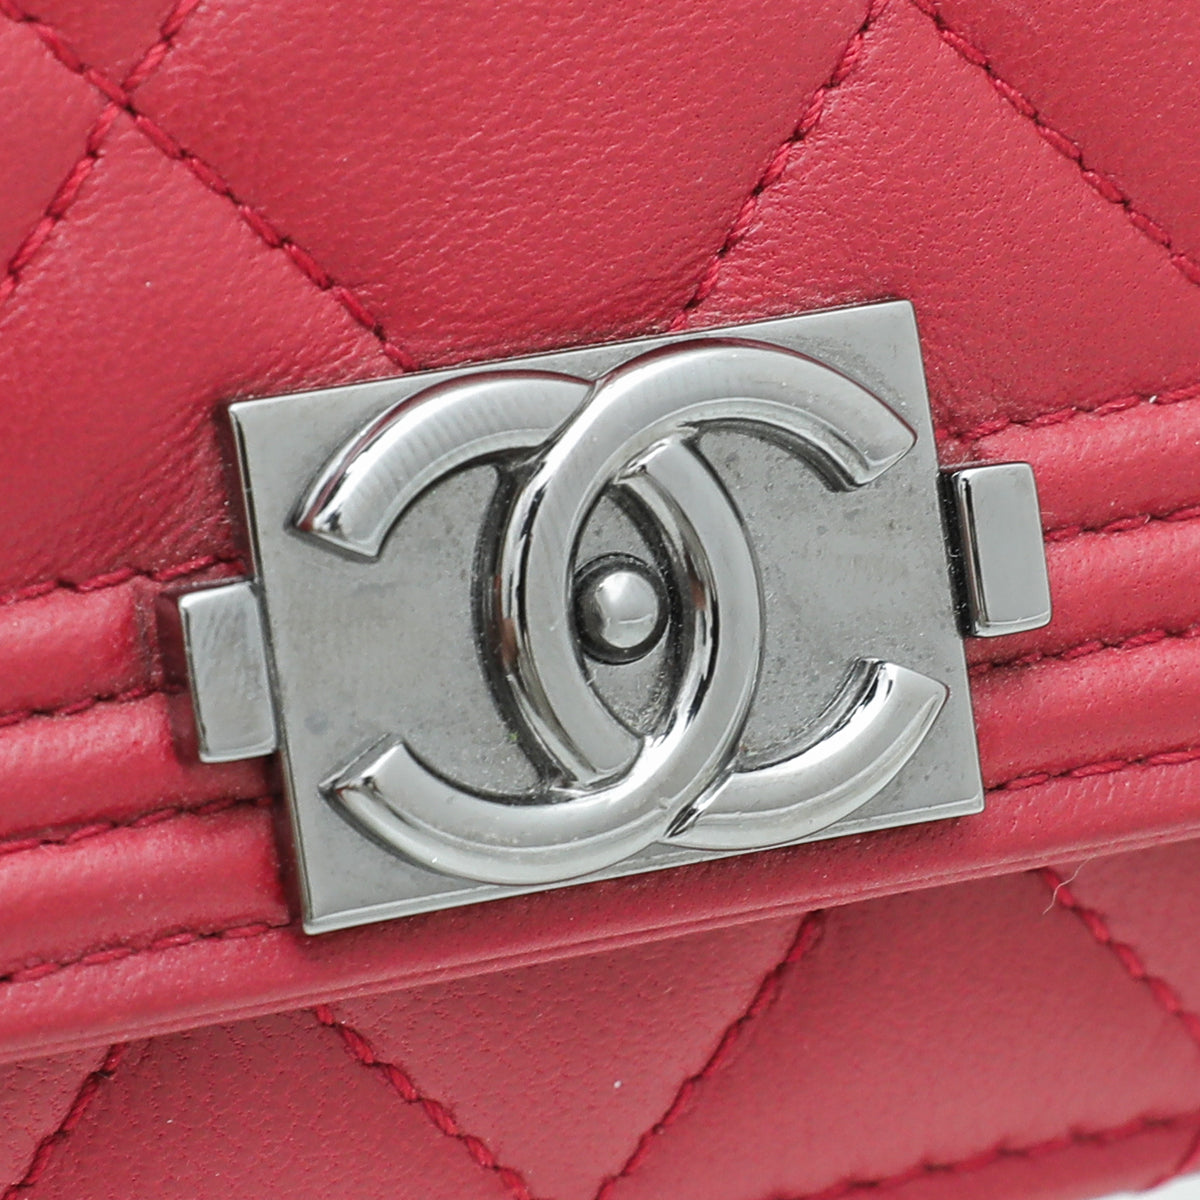 Chanel Red Le Boy Wallet On Chain